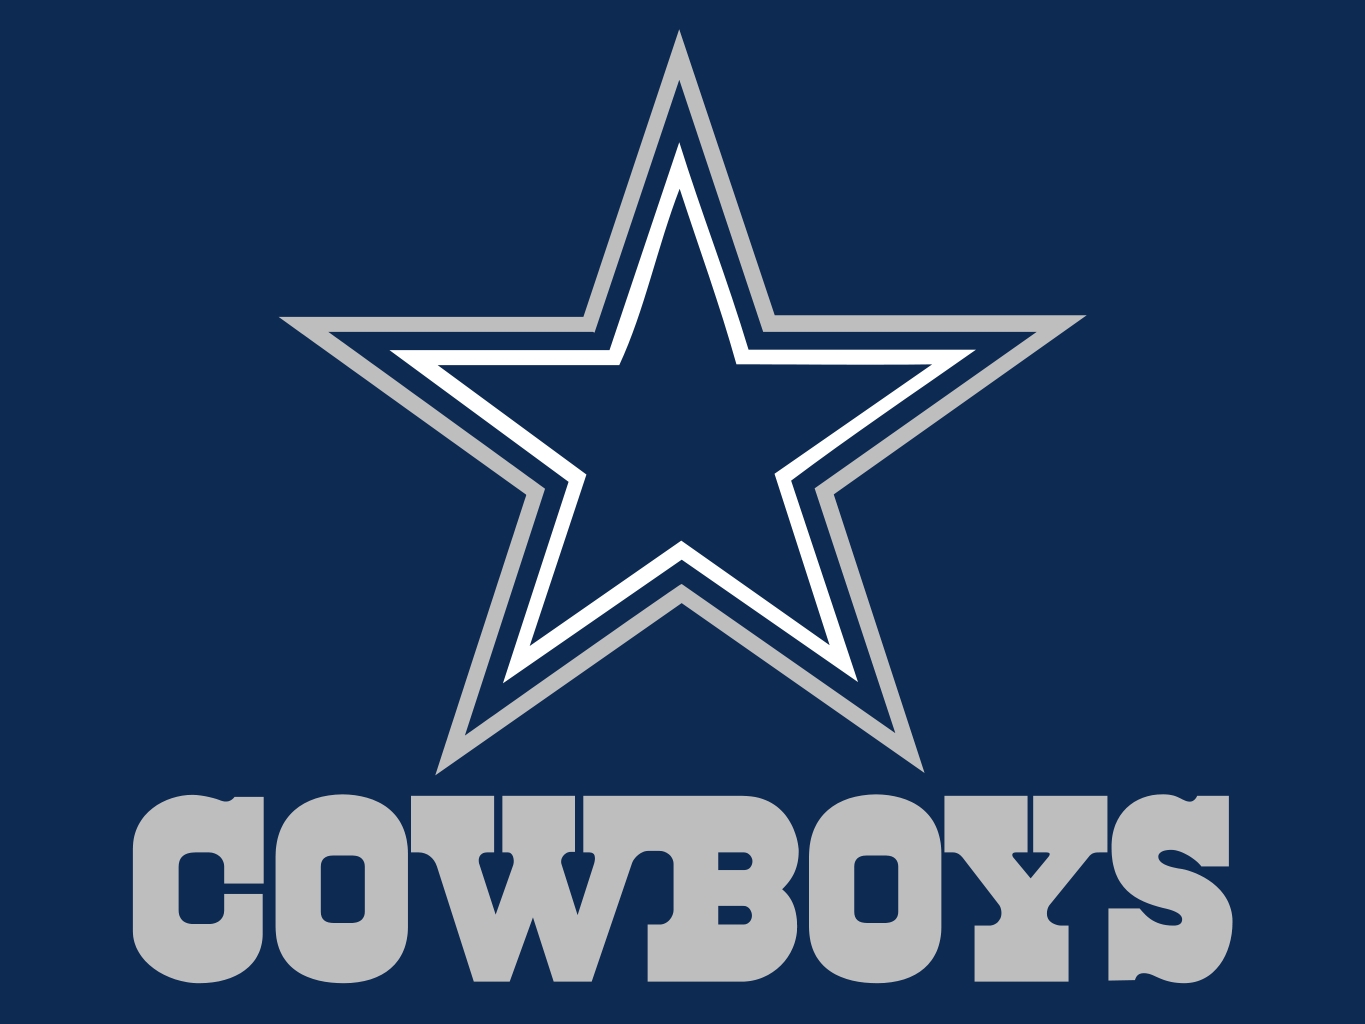 Can the Cowboys save the NFL? - Ronn Torossian Update